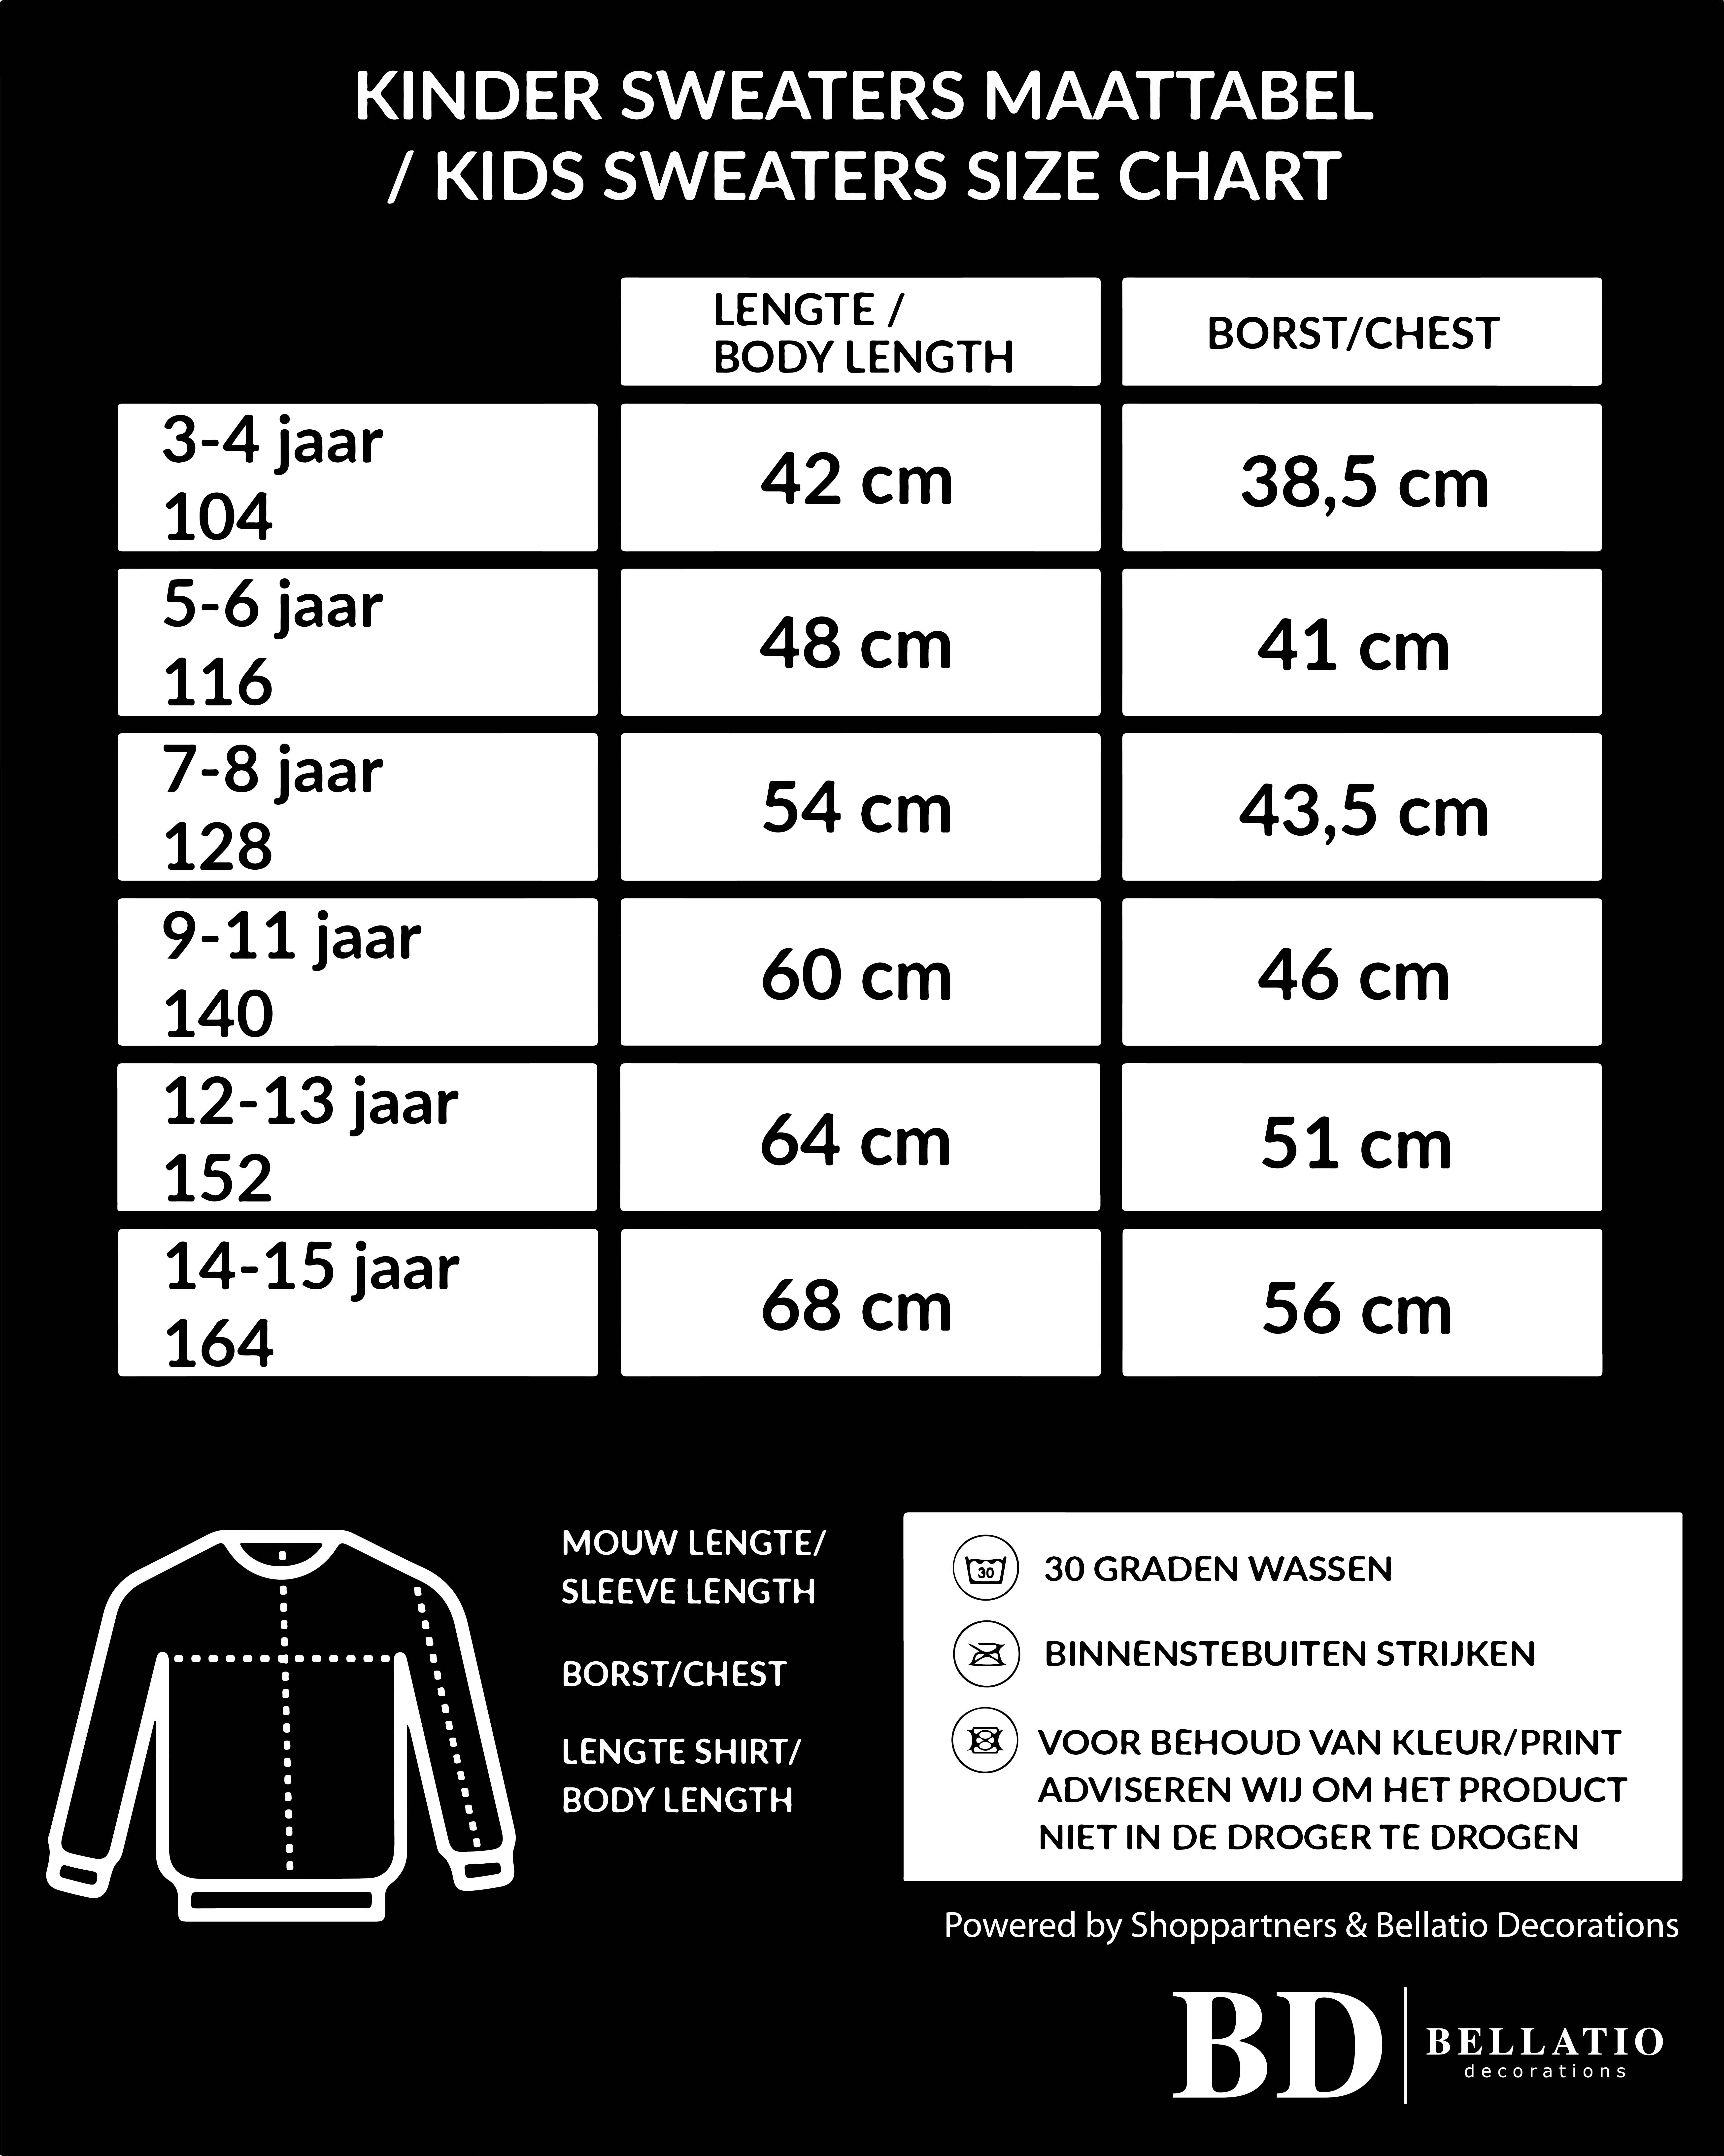 Kingsday sweater Princess with crown black for kids